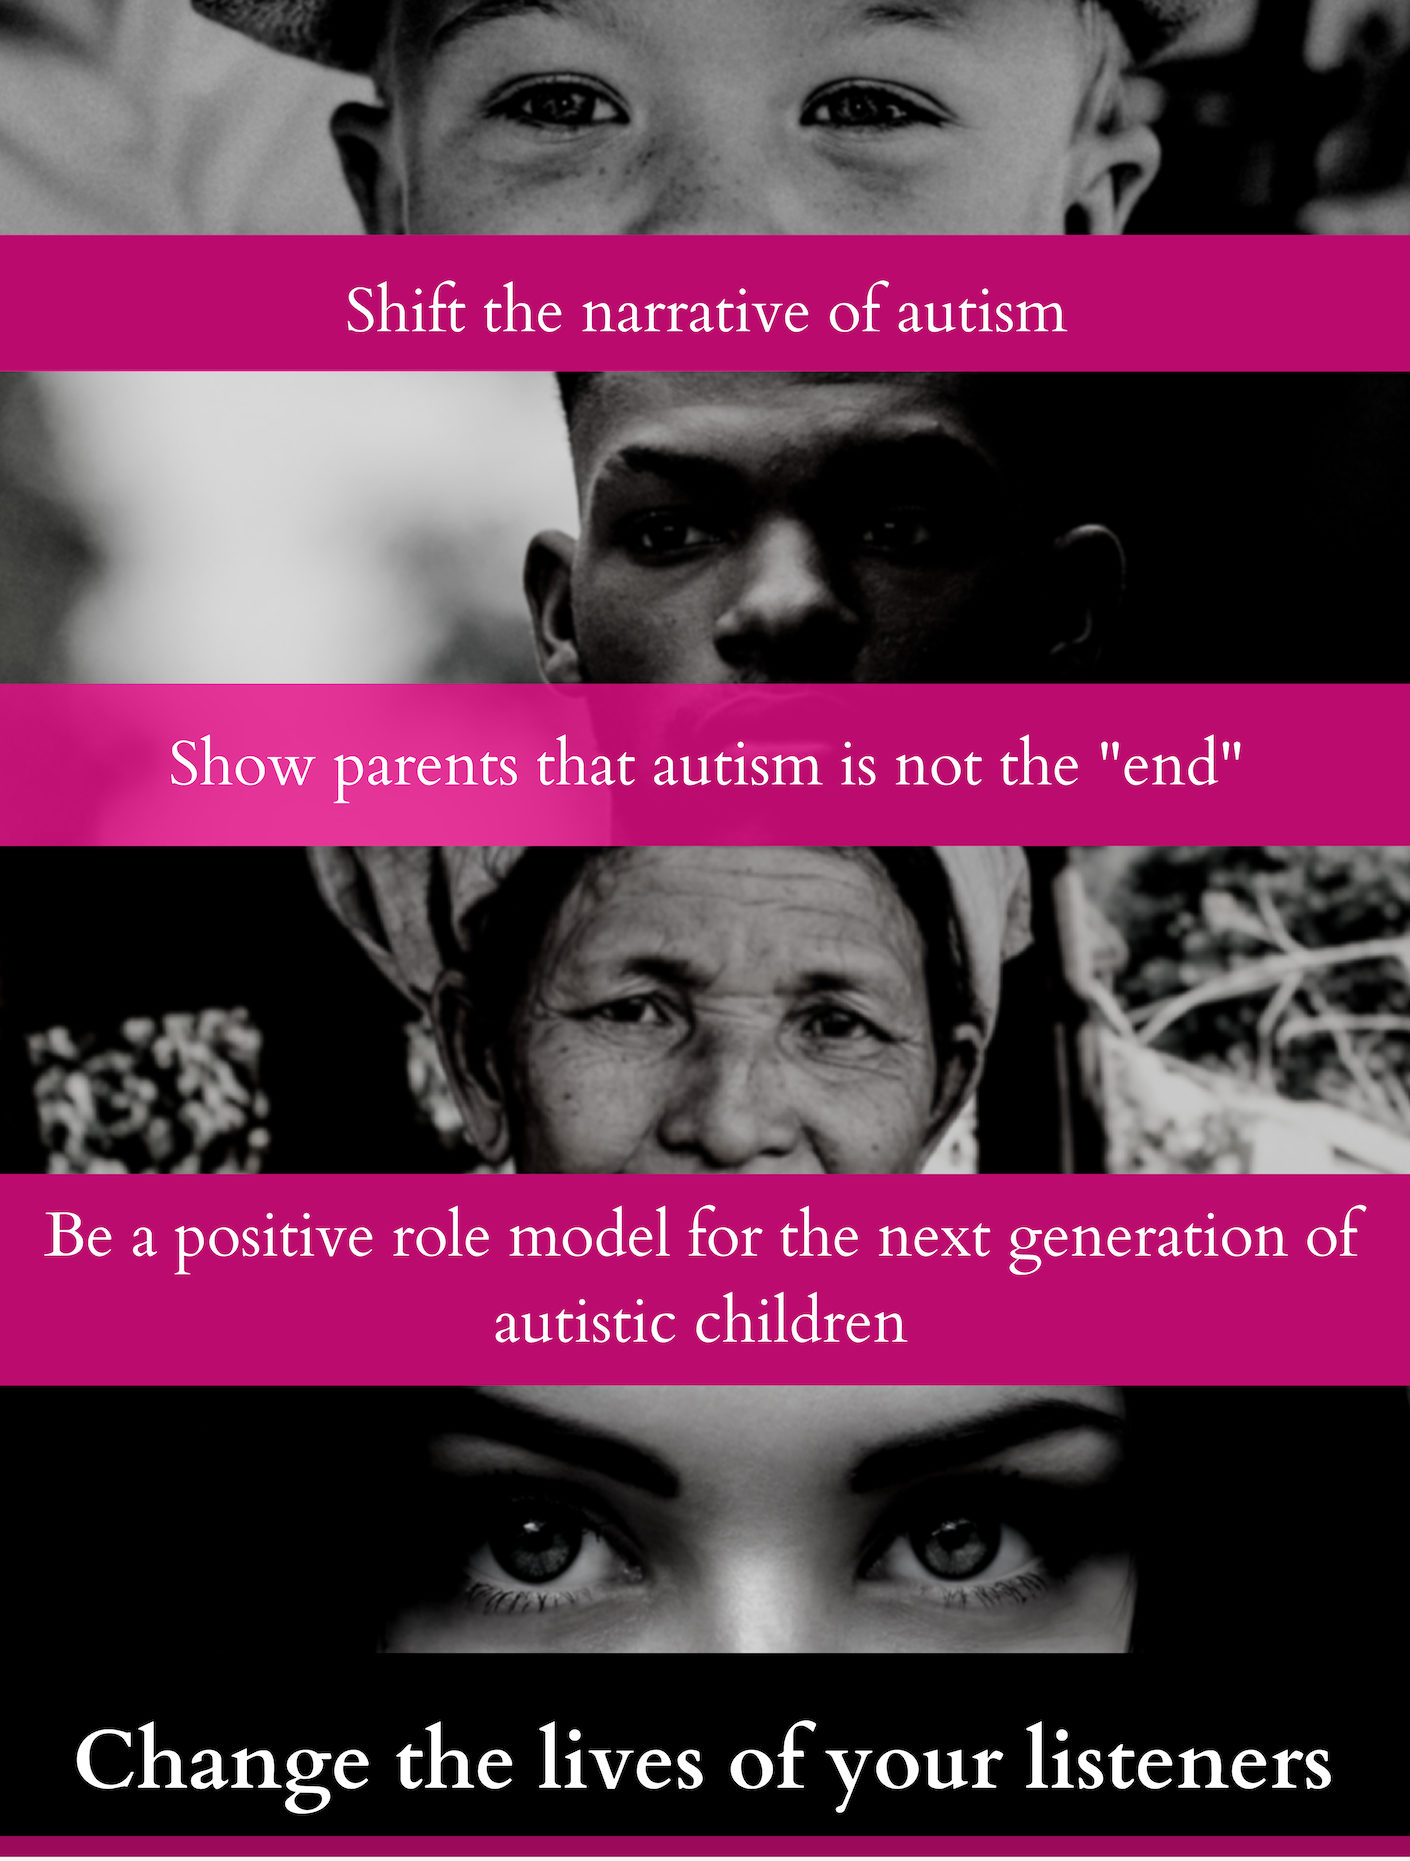 Shift the narrative of autism. Show parents that autism is not the "end." Be a positive role model for the next generation of autistic children. Change the lives of your listeners.